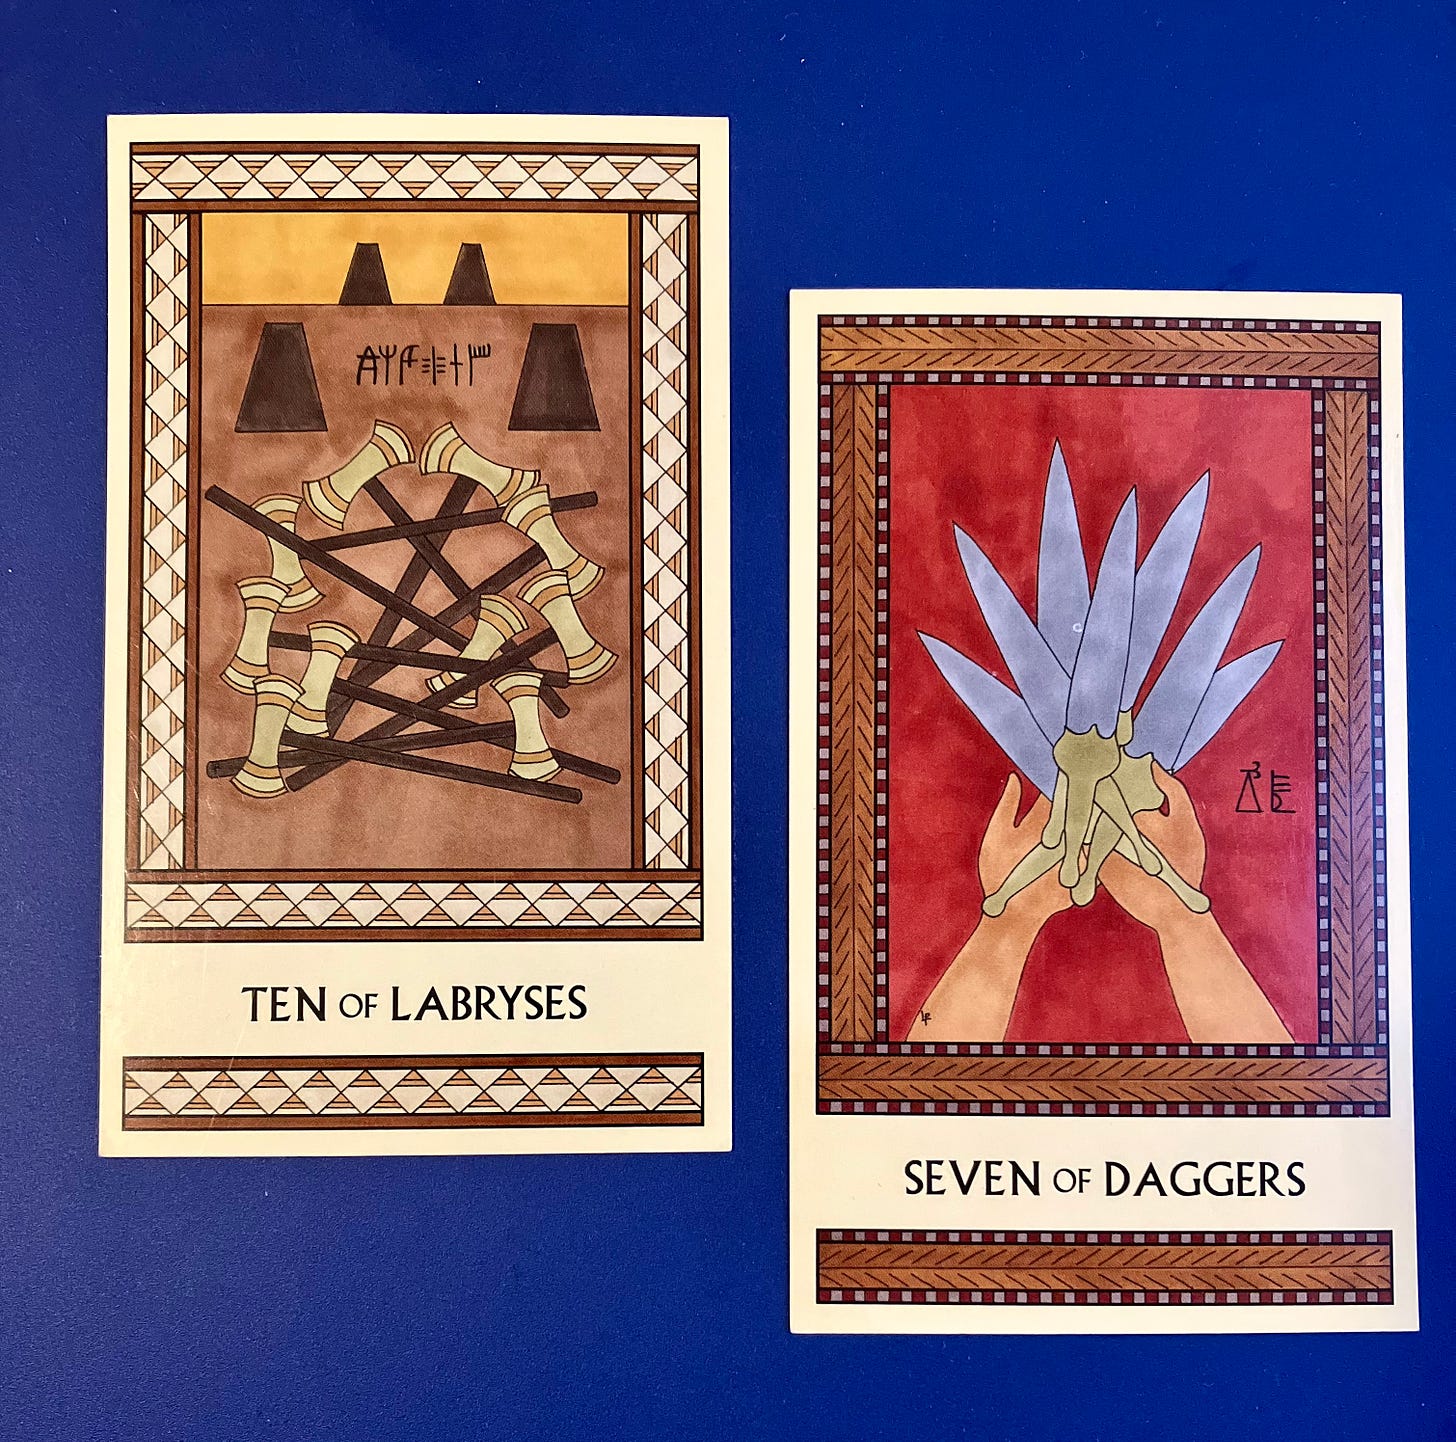 Two Minoan Tarot cards side by side on a deep blue background. The Ten of Labryses is in shades of gold and tan. It shows ten labryses lying in a heap on the floor, with four empty labrys stands in the background. The Seven of Daggers is in shades of deep red and tan. It shows two hands holding a pile of seven daggers all at once.